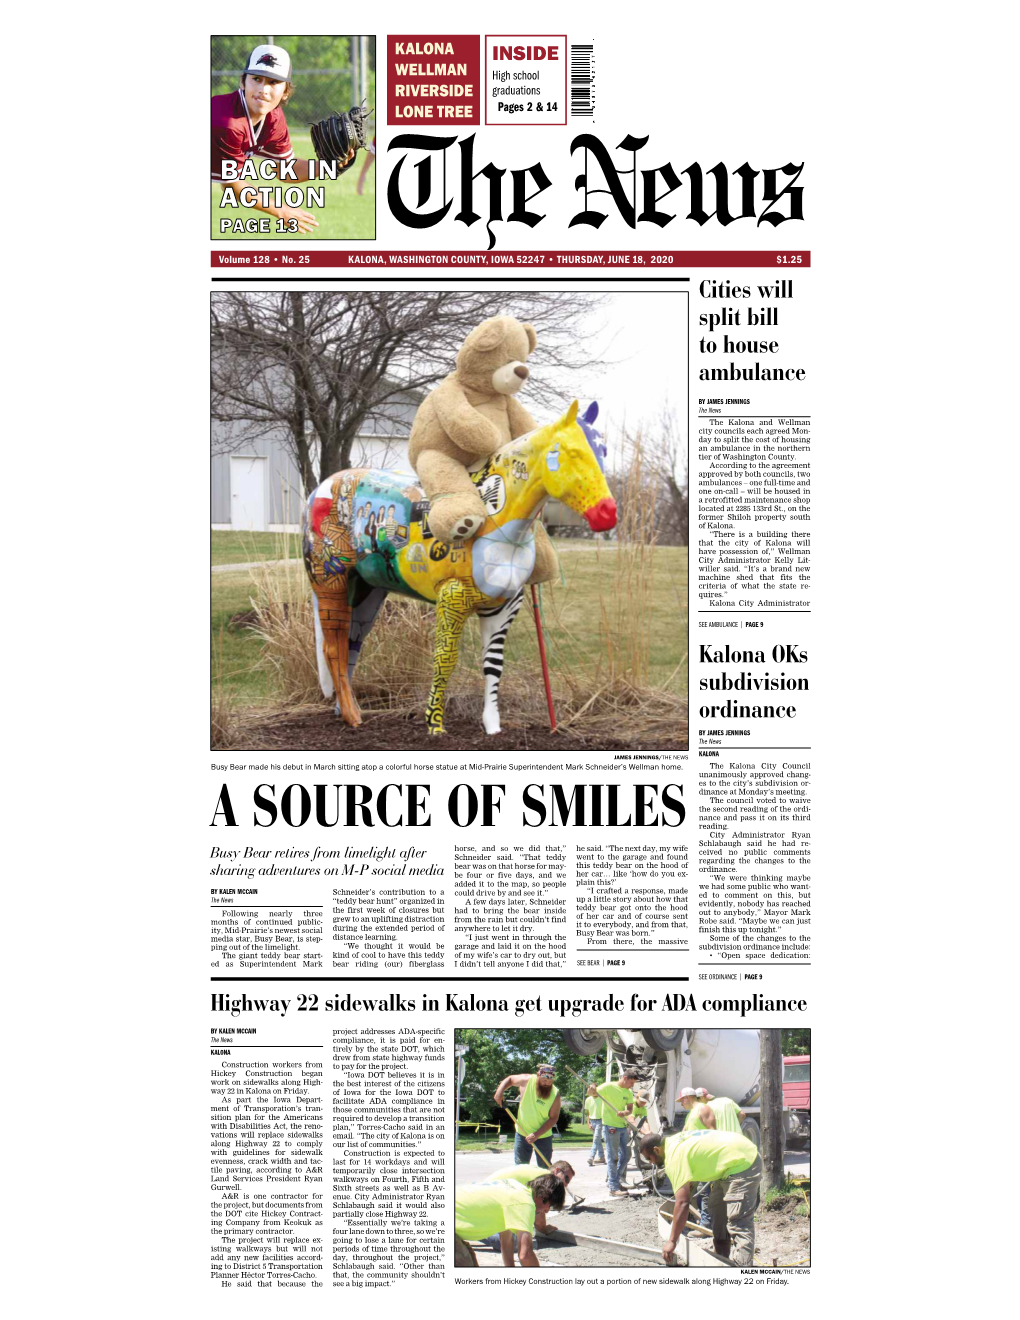 A SOURCE of SMILES City Administrator Ryan Schlabaugh Said He Had Re- Horse, and So We Did That,” He Said